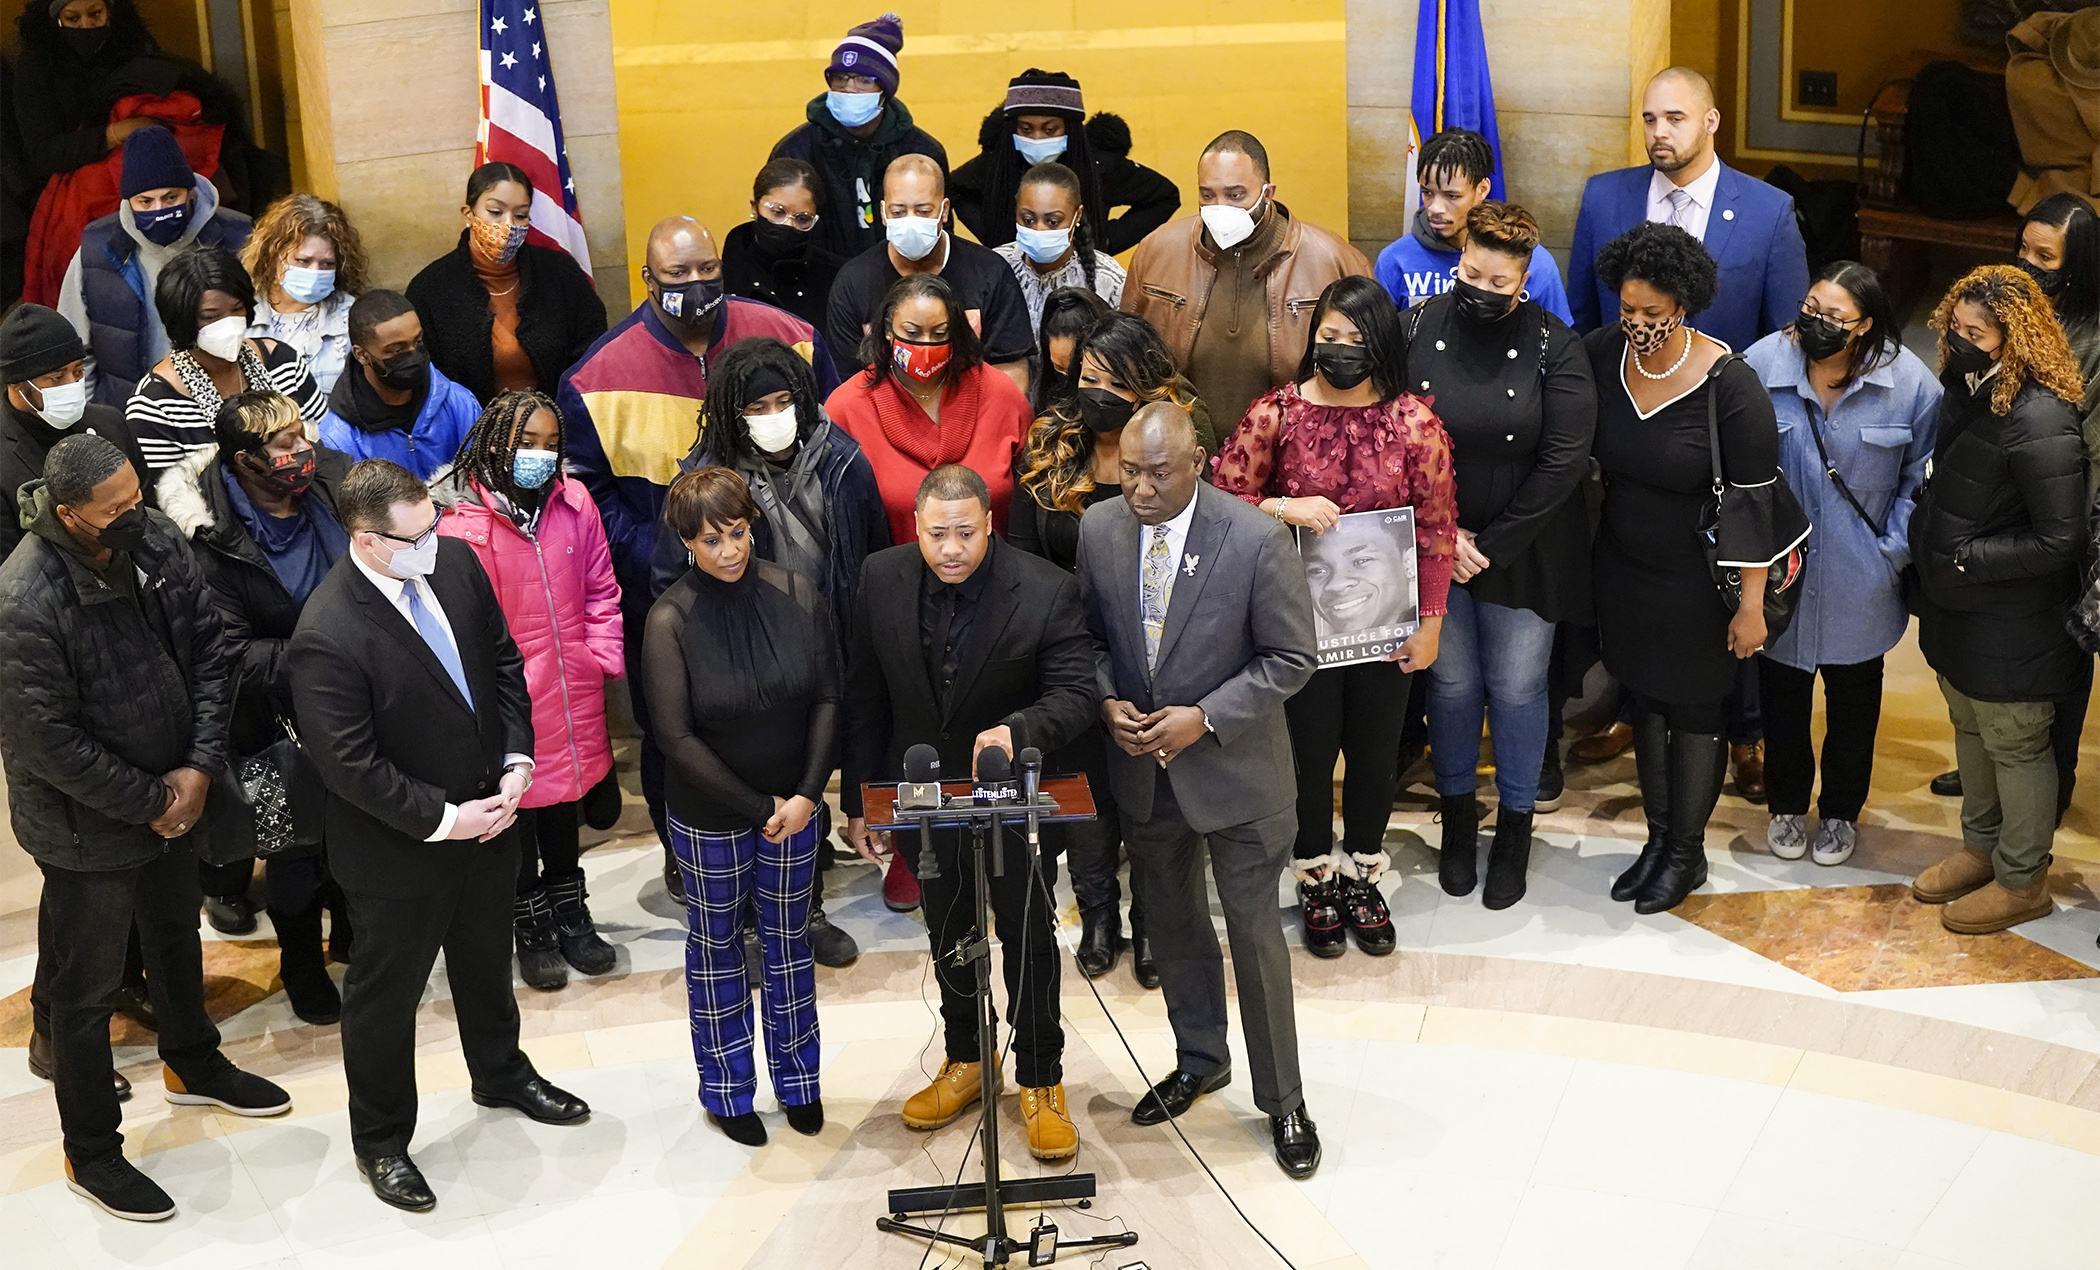 Andre Locke, father of Amir Locke, speaks at a Feb. 10 Capitol press conference demanding a ban on no-knock search warrants. Also pictured are Amir’s mother, Karen Wells, and attorney Ben Crump. (Photo by Paul Battaglia)